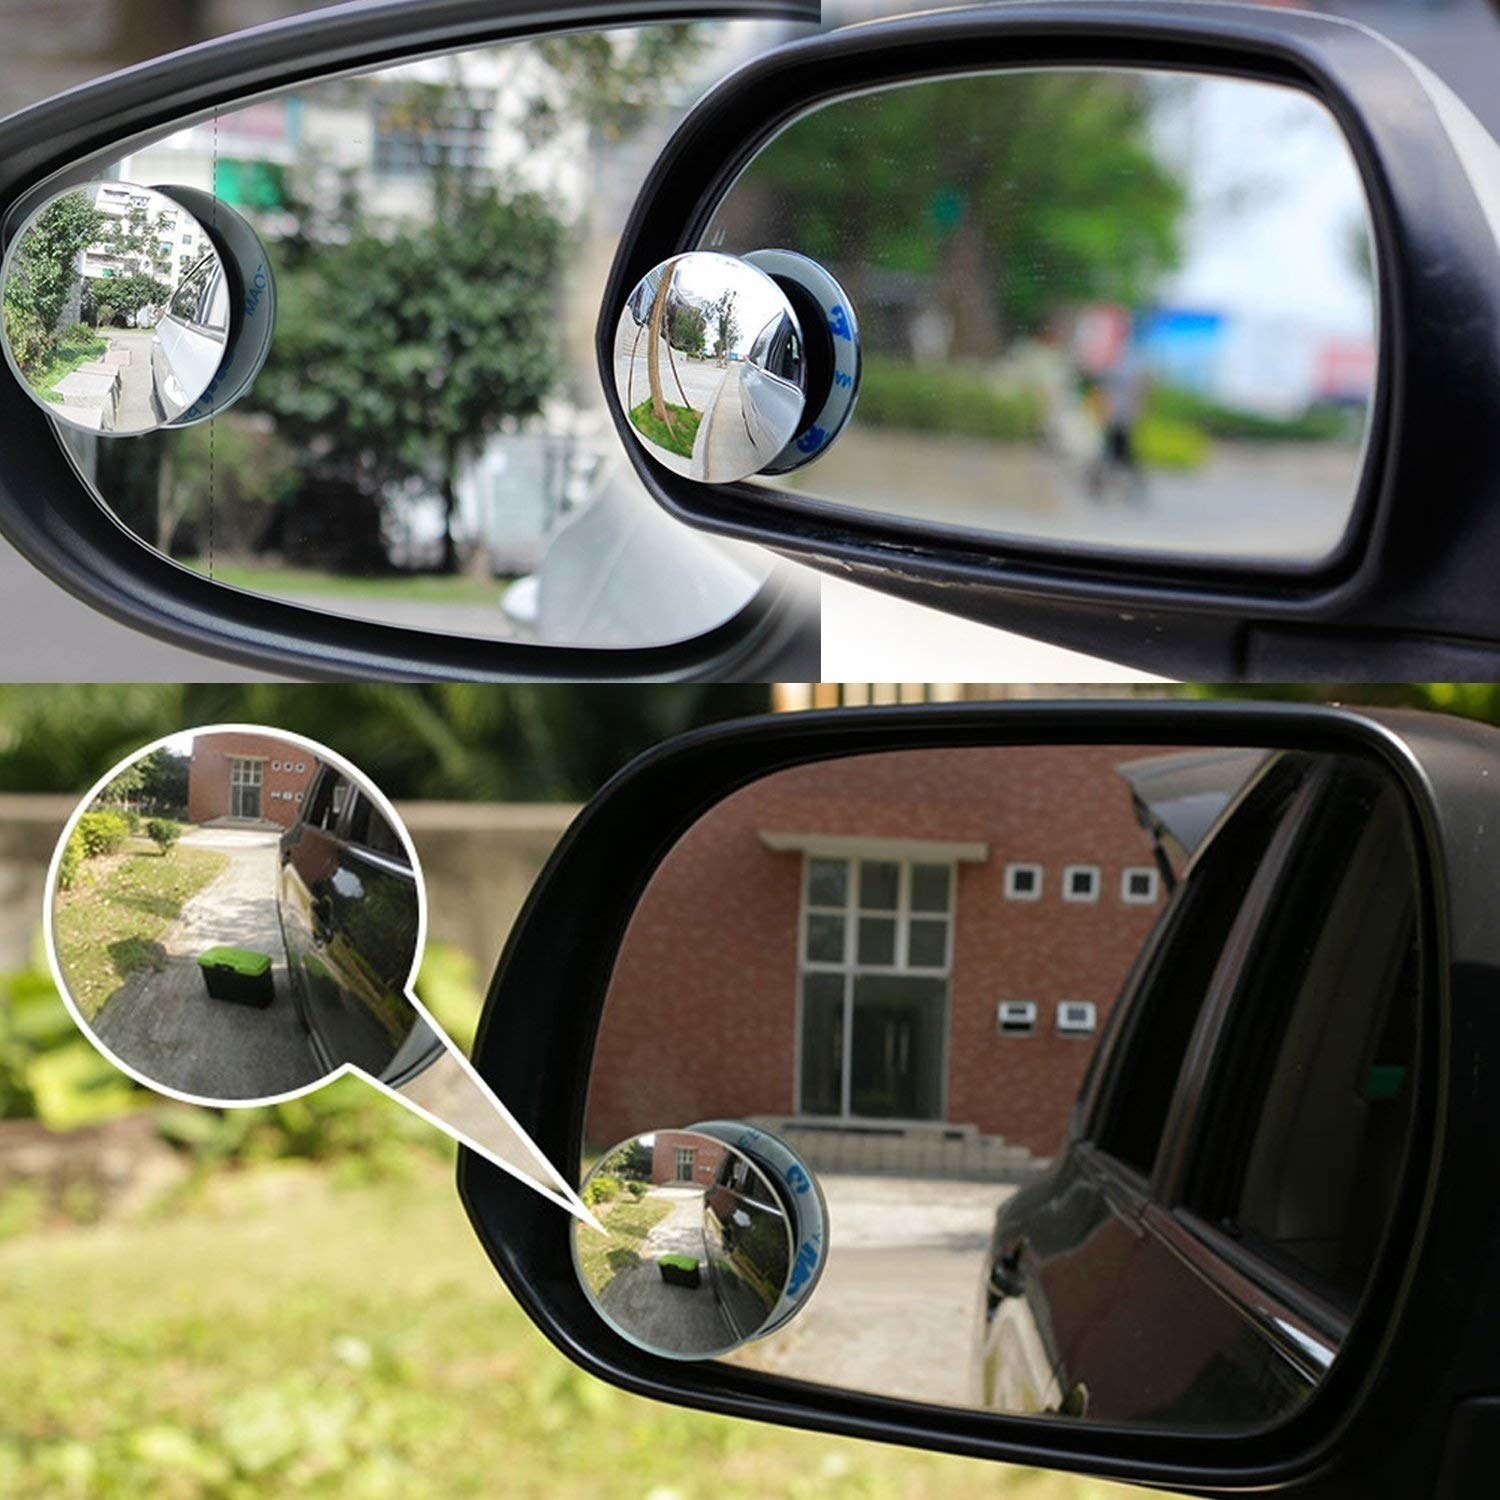 The mirror attached to a car side window to show what they reflect